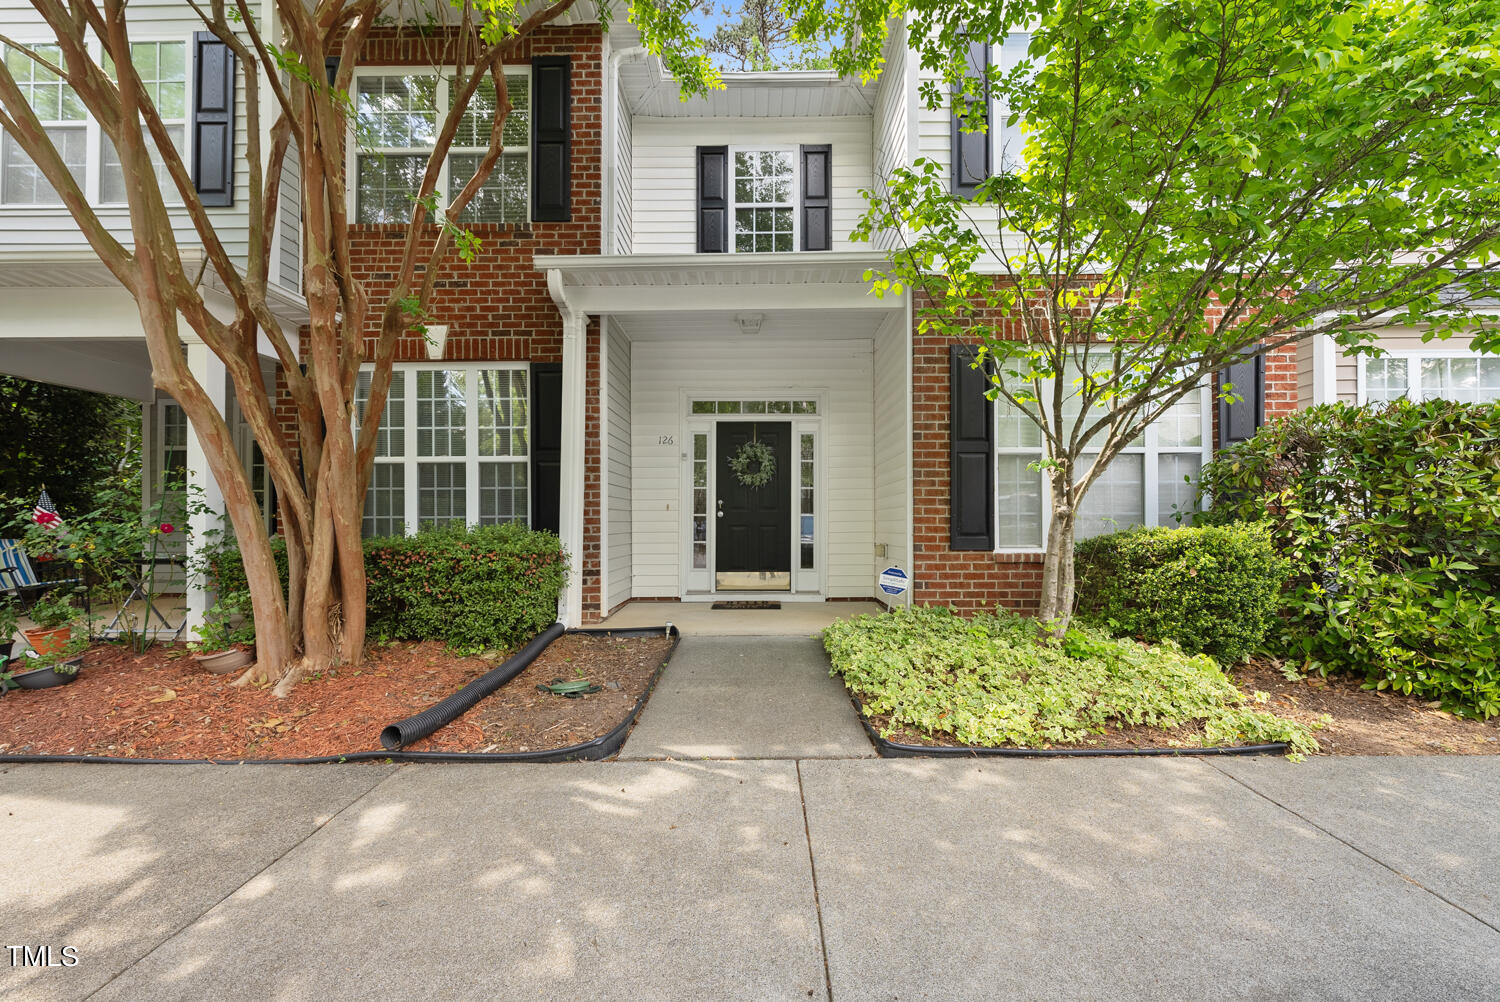 View Cary, NC 27513 townhome